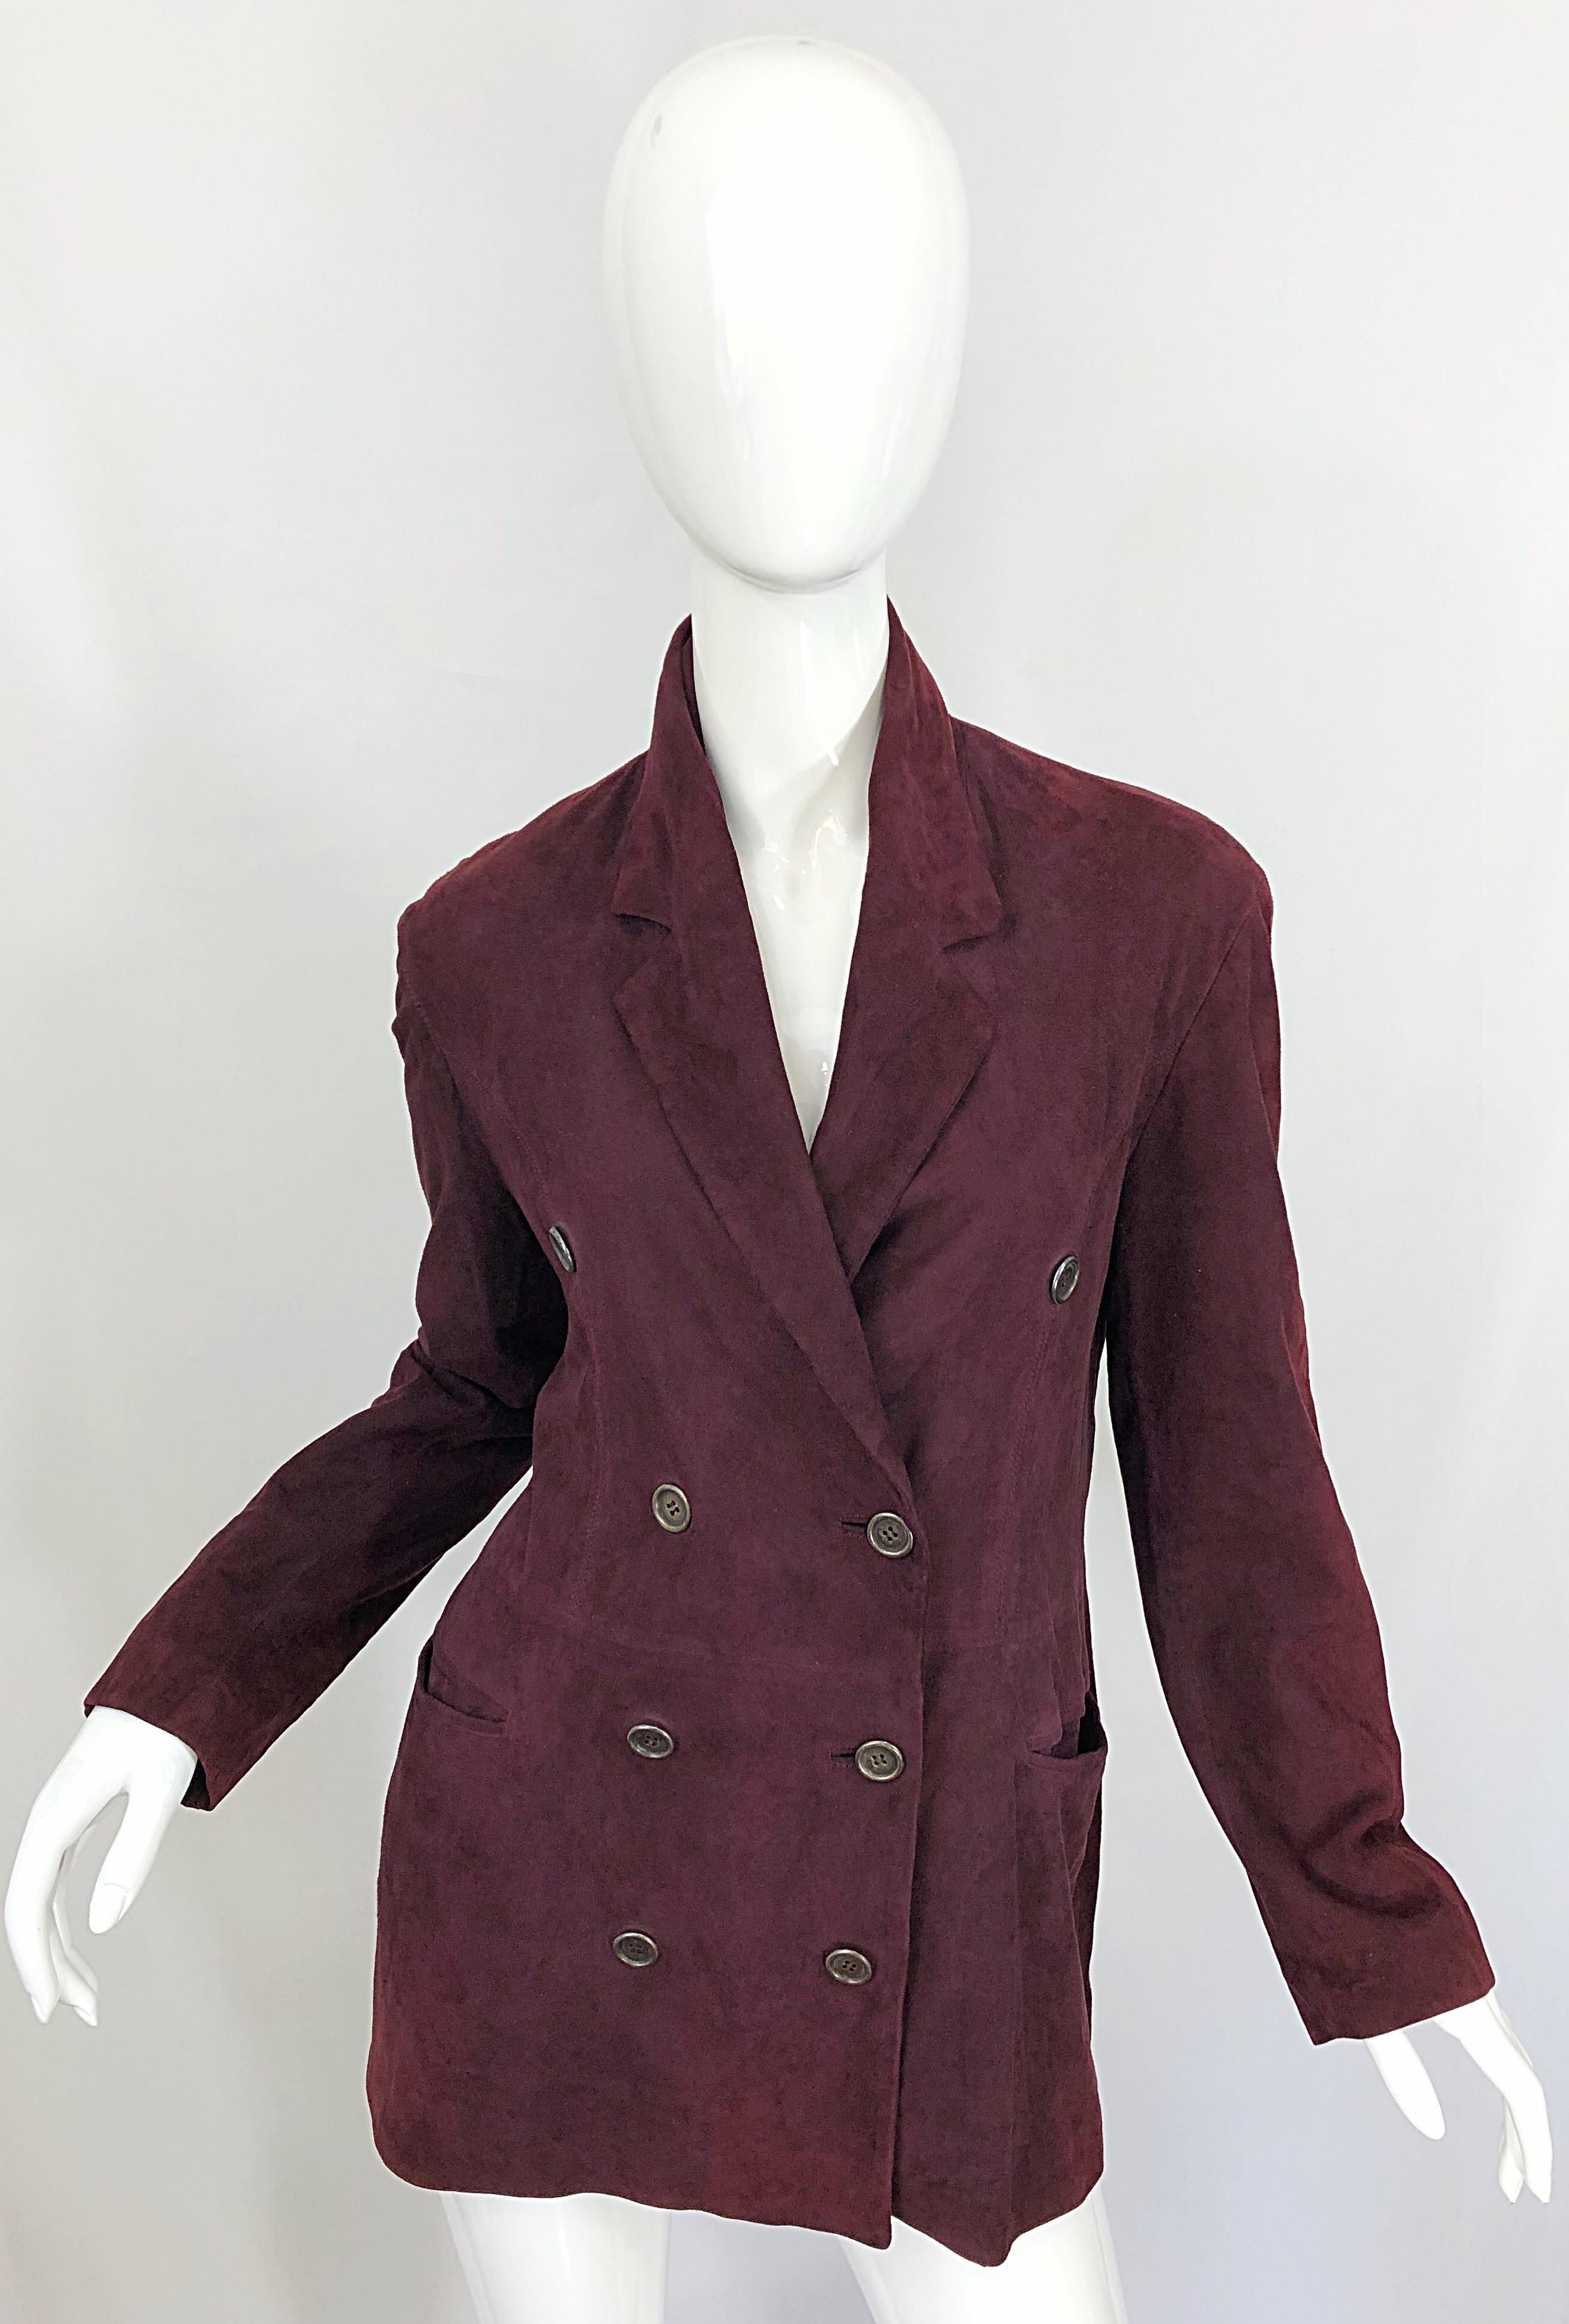 Ozbek 1990s Suede Leather Size 8 Burgundy Maroon Double Breasted Blazer Jacket For Sale 7